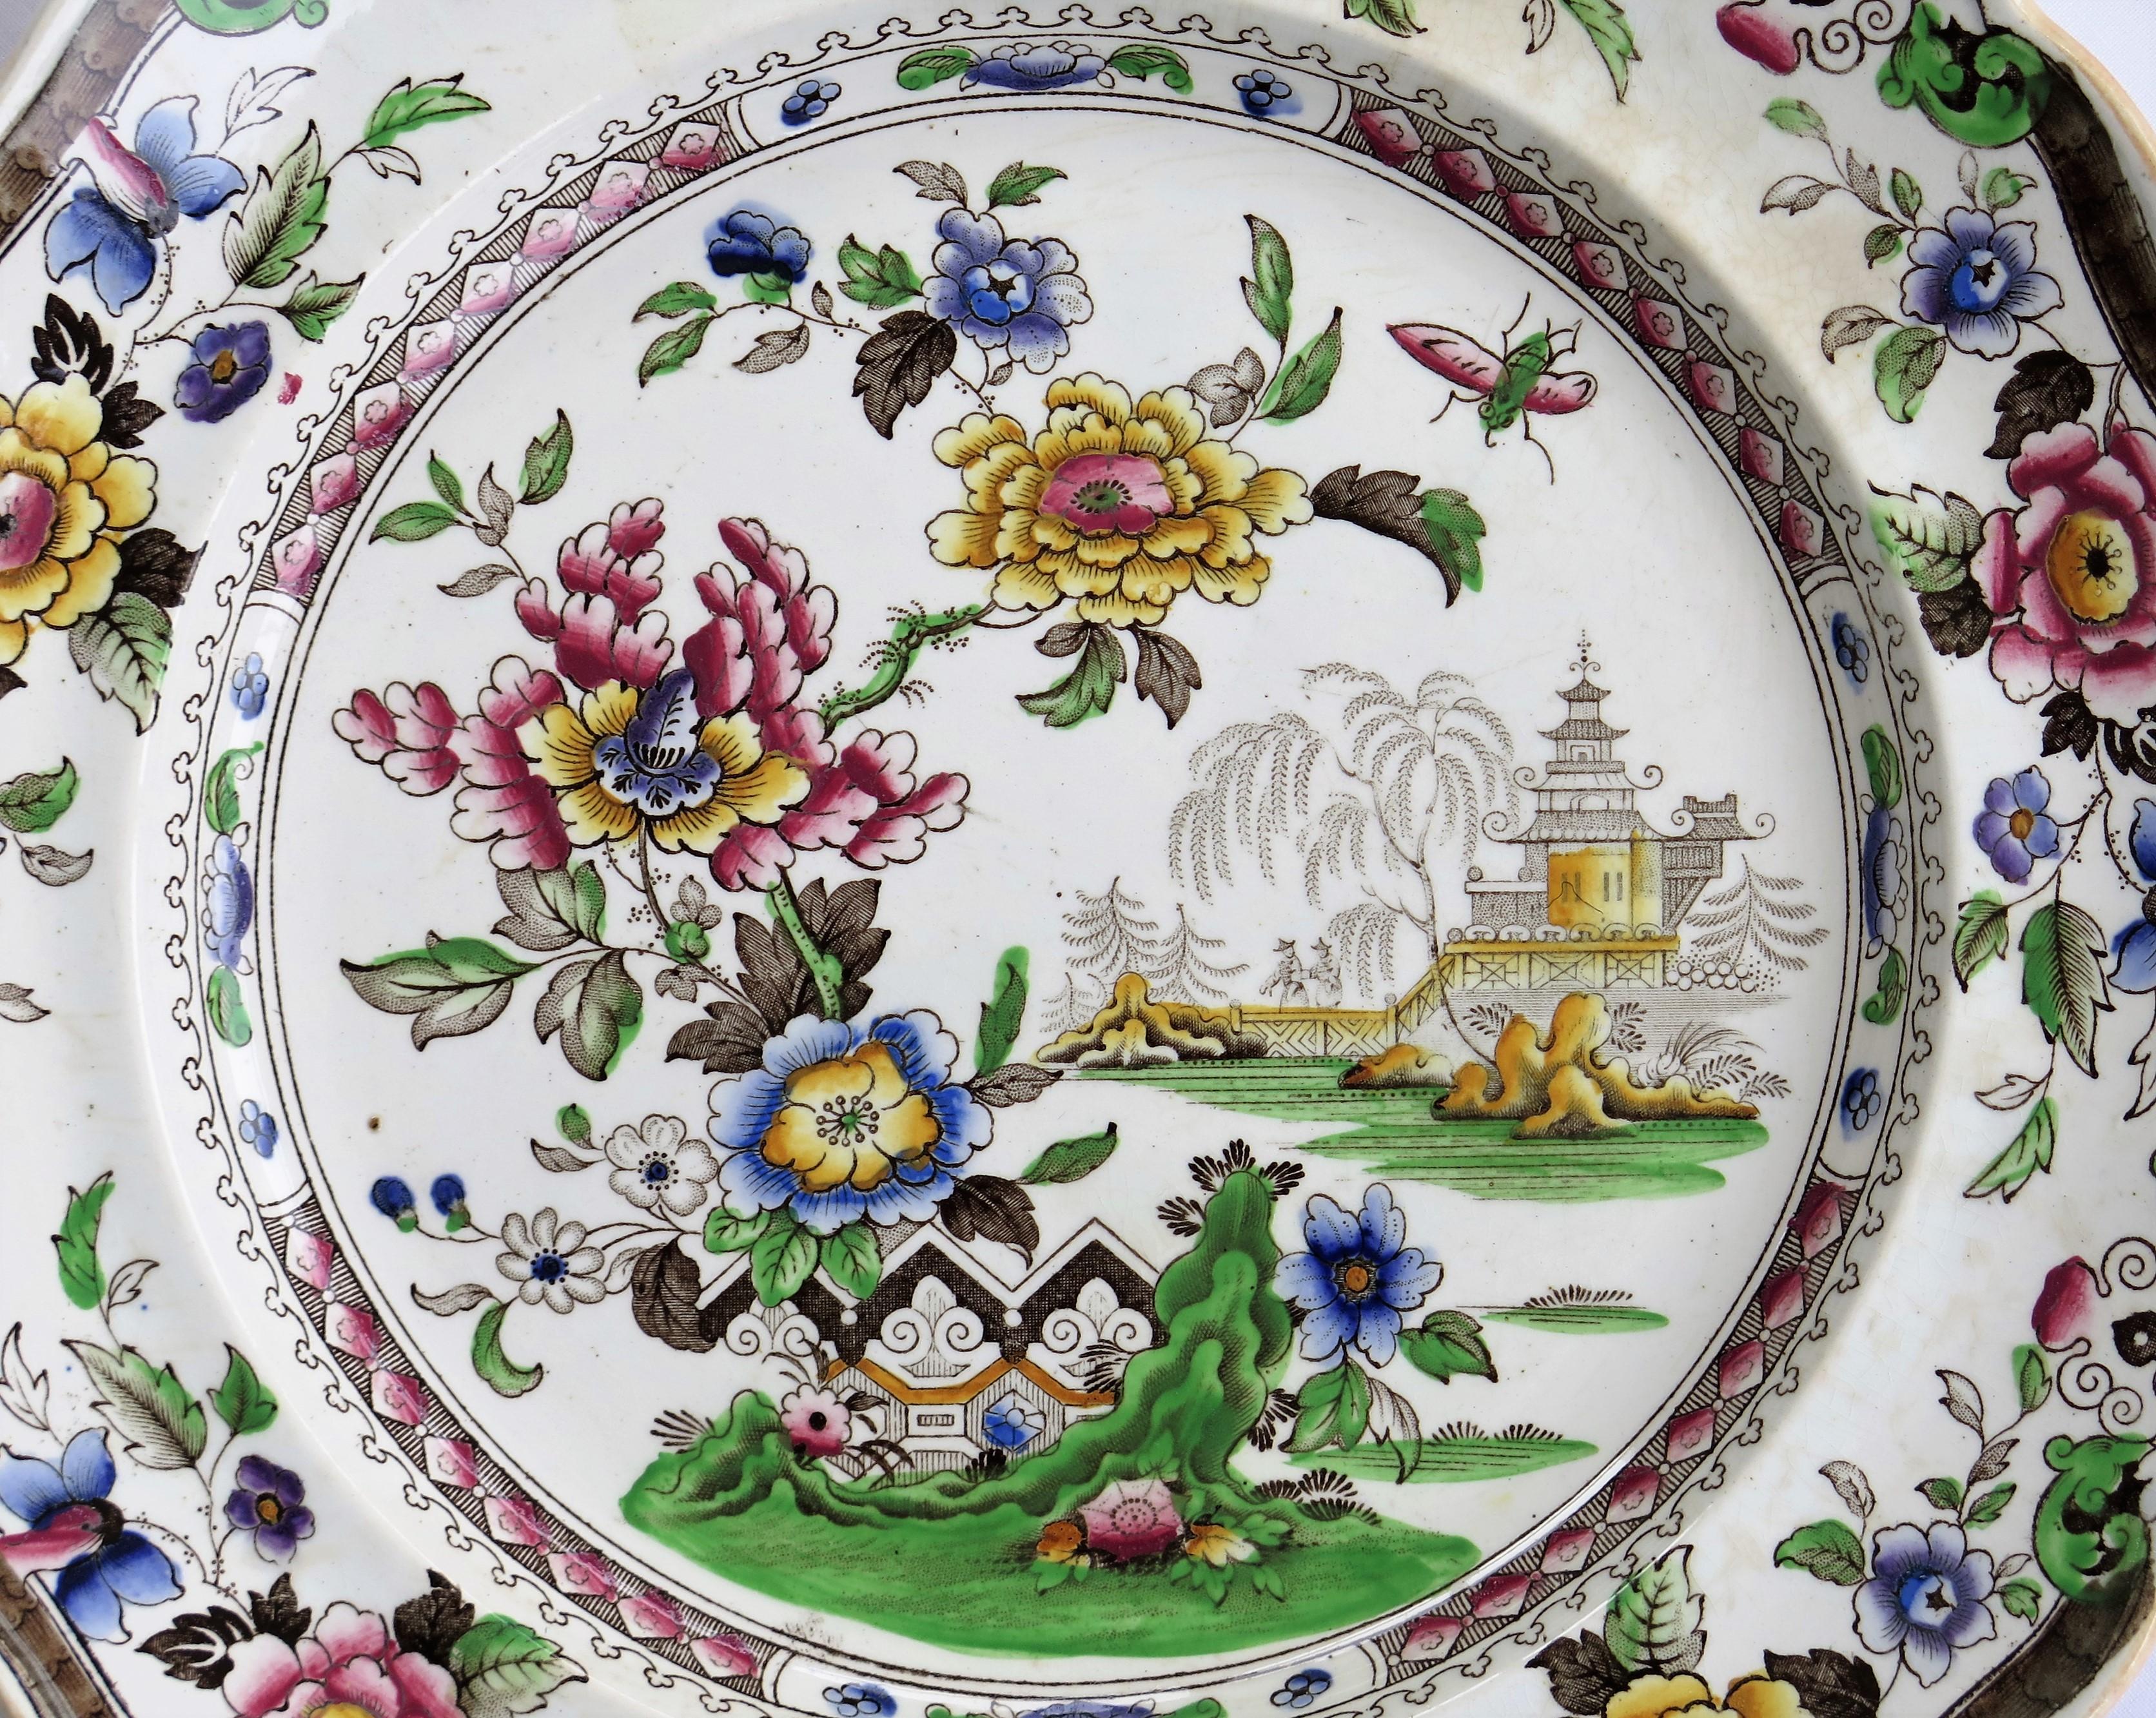 Earthenware SIX Large Pottery Dinner Plates by Zachariah Boyle Chinese Flora Ptn, circa 1825